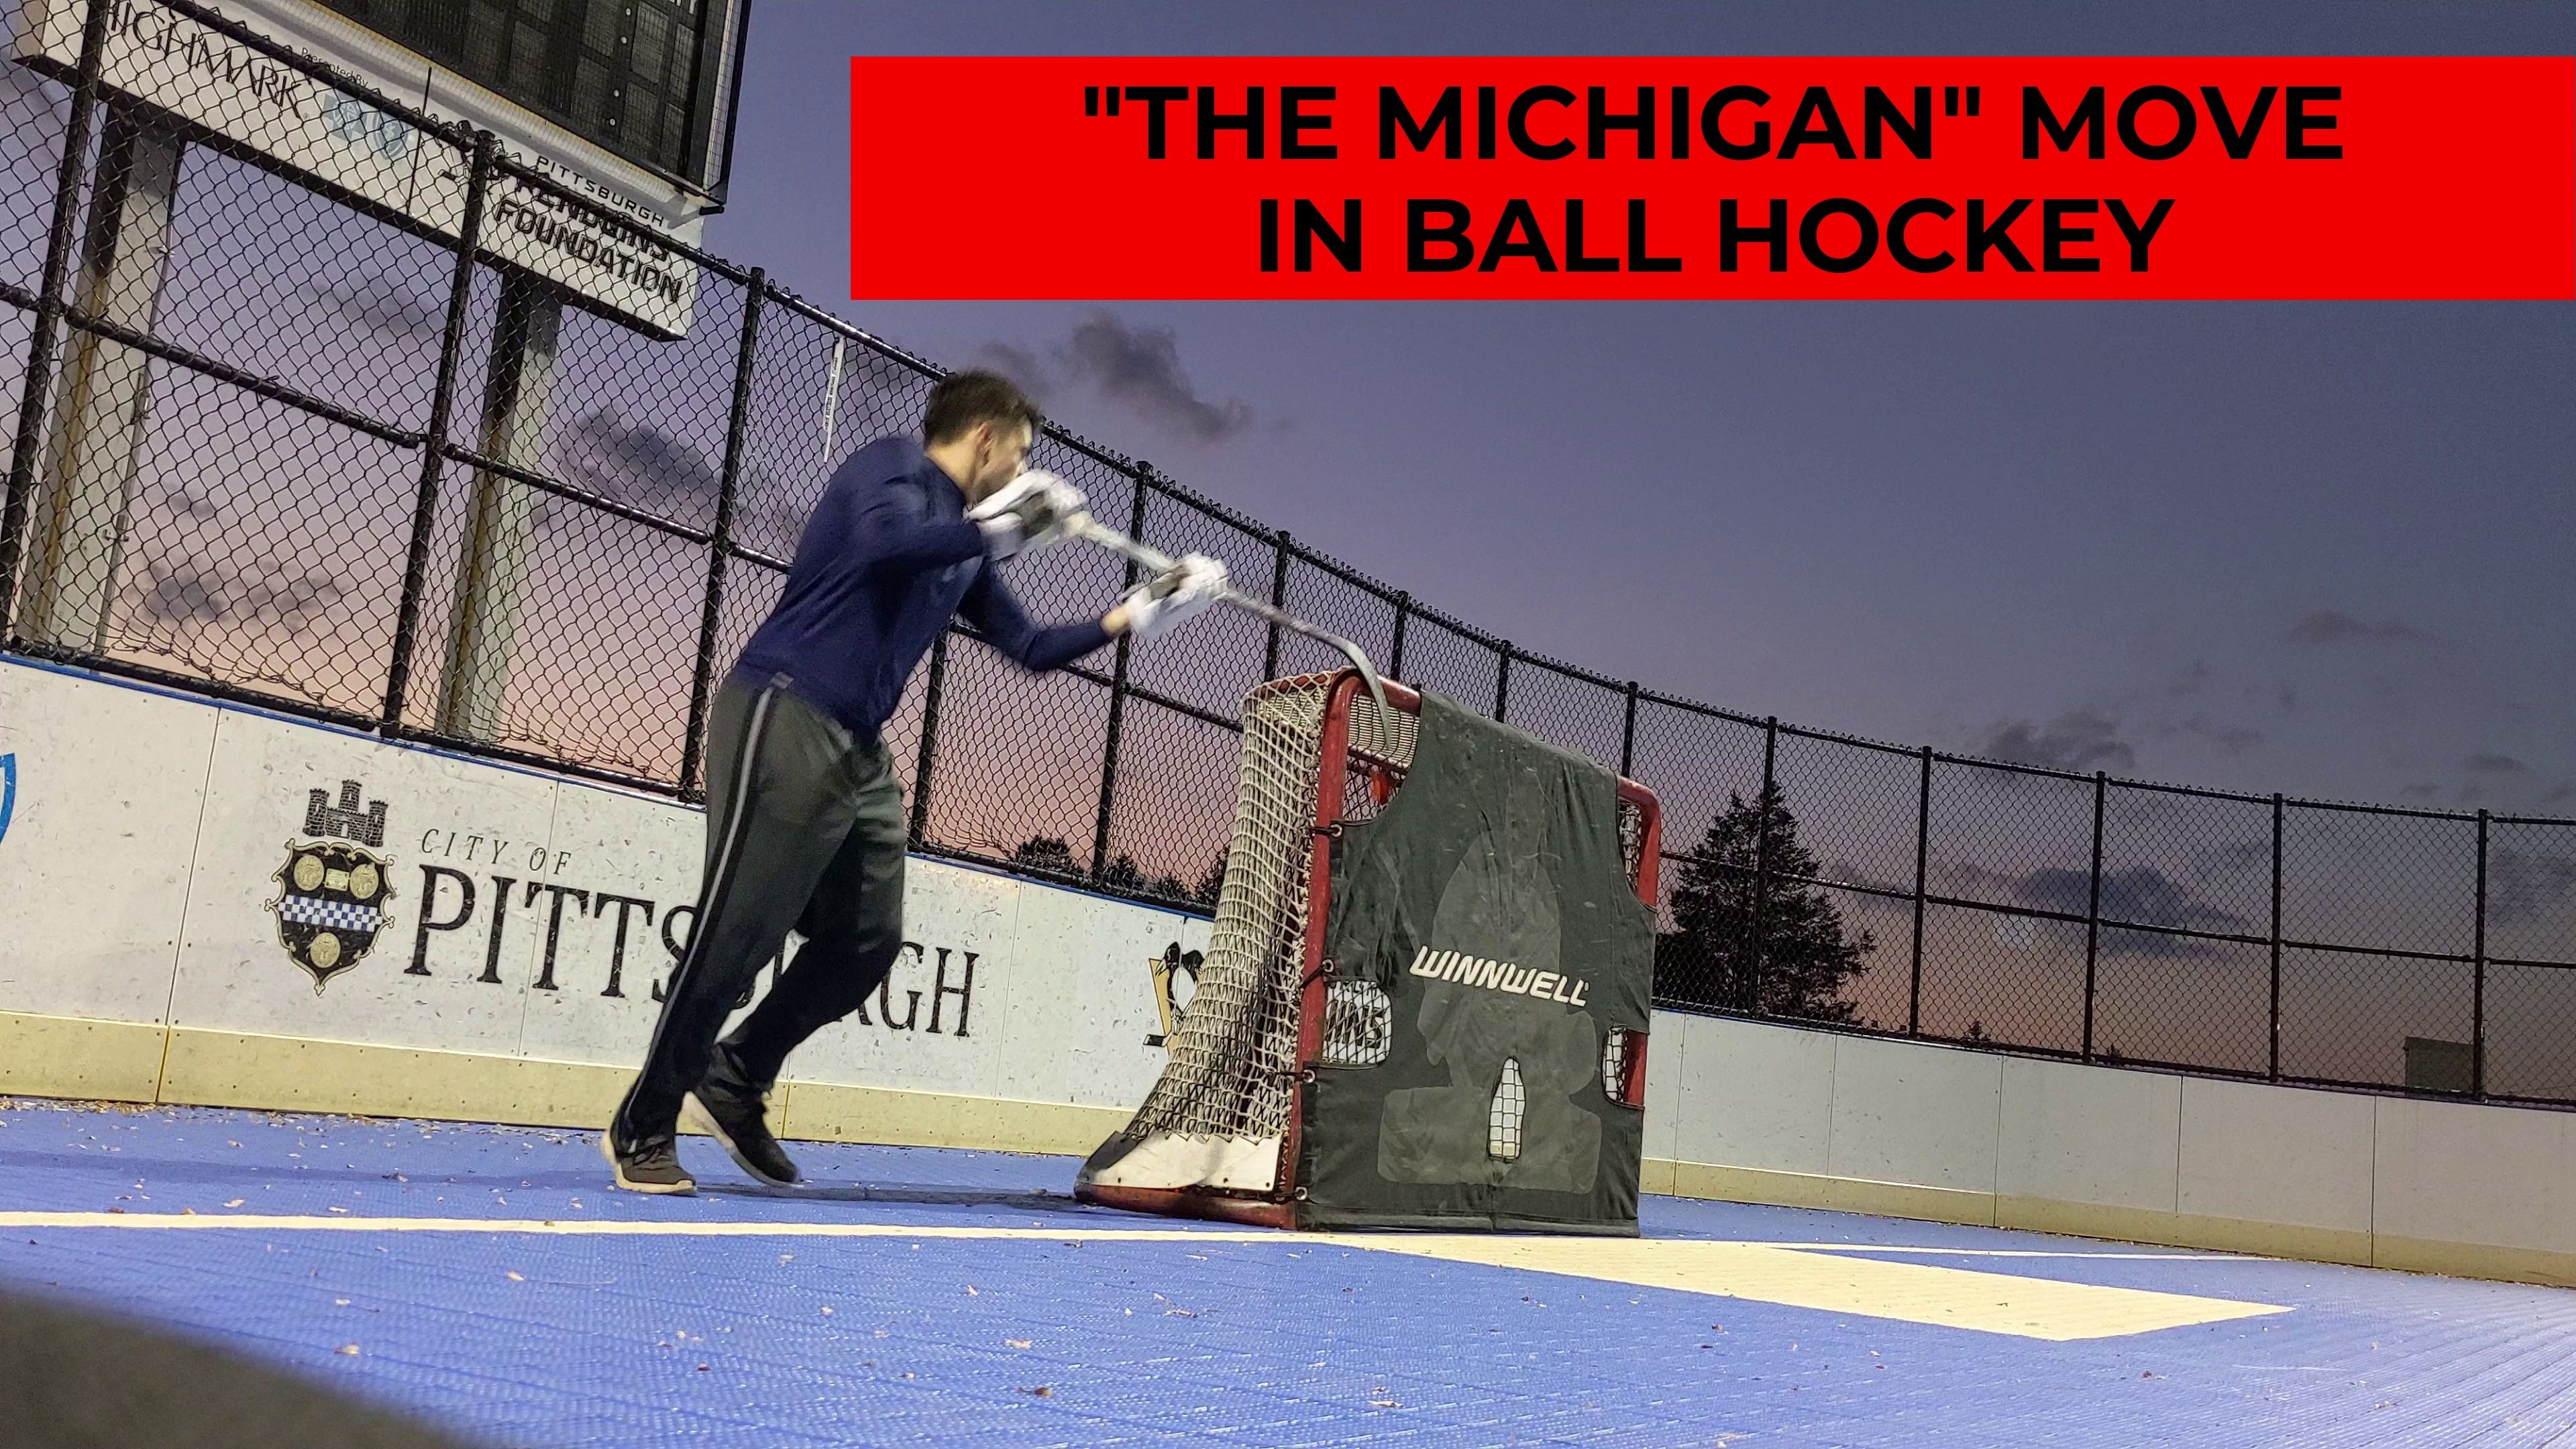 Working On "The Michigan" Move In Ball Hockey